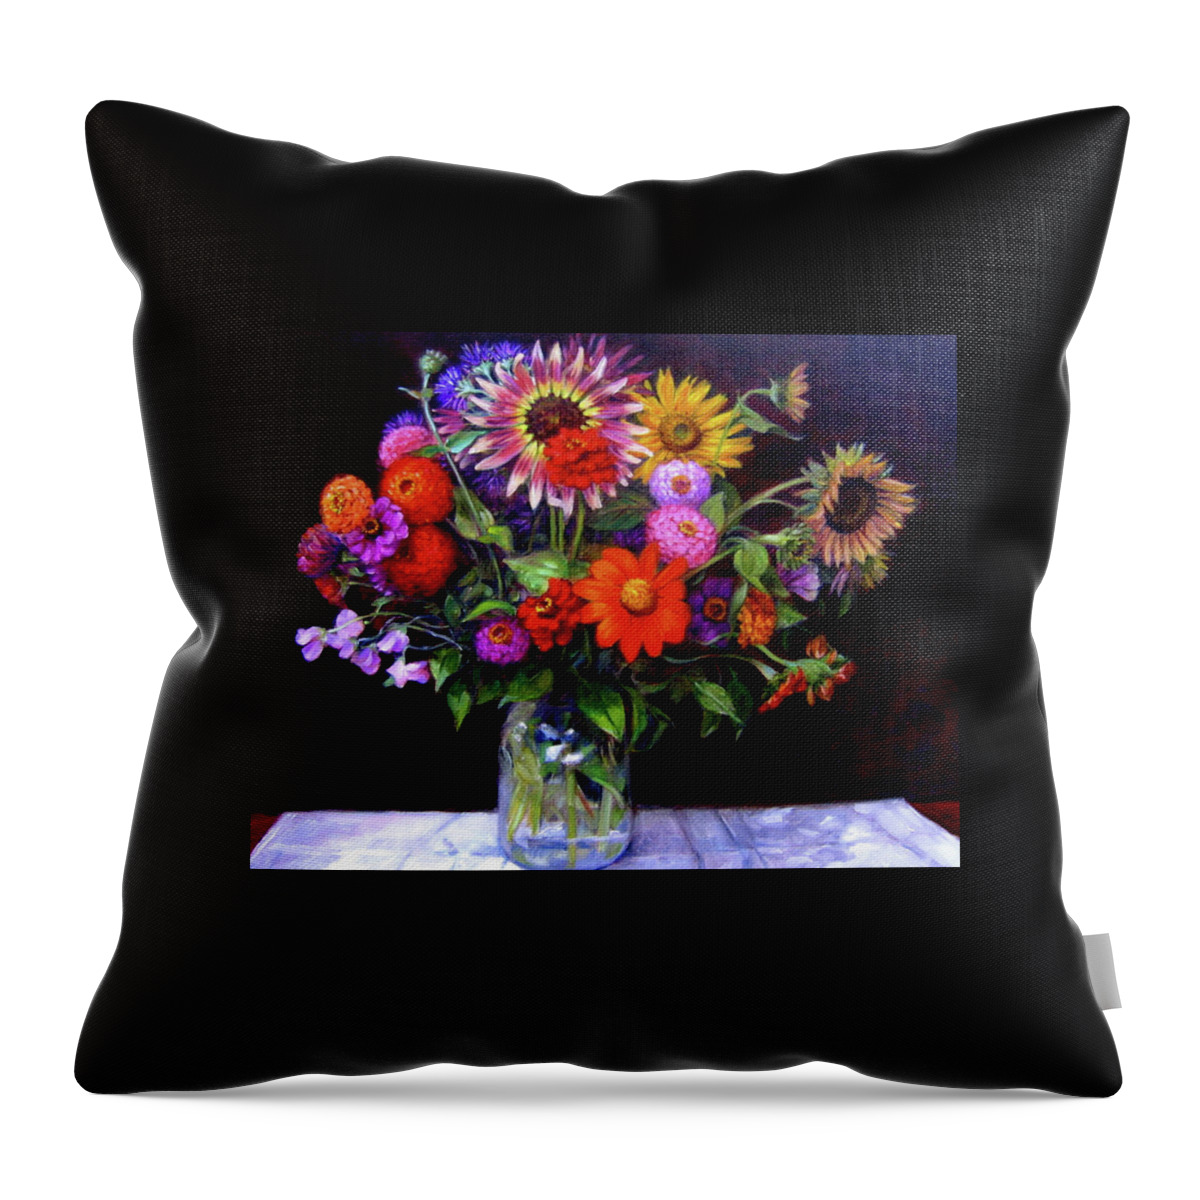 Floral Bouquet Throw Pillow featuring the painting Fall Bouquet by Marie Witte